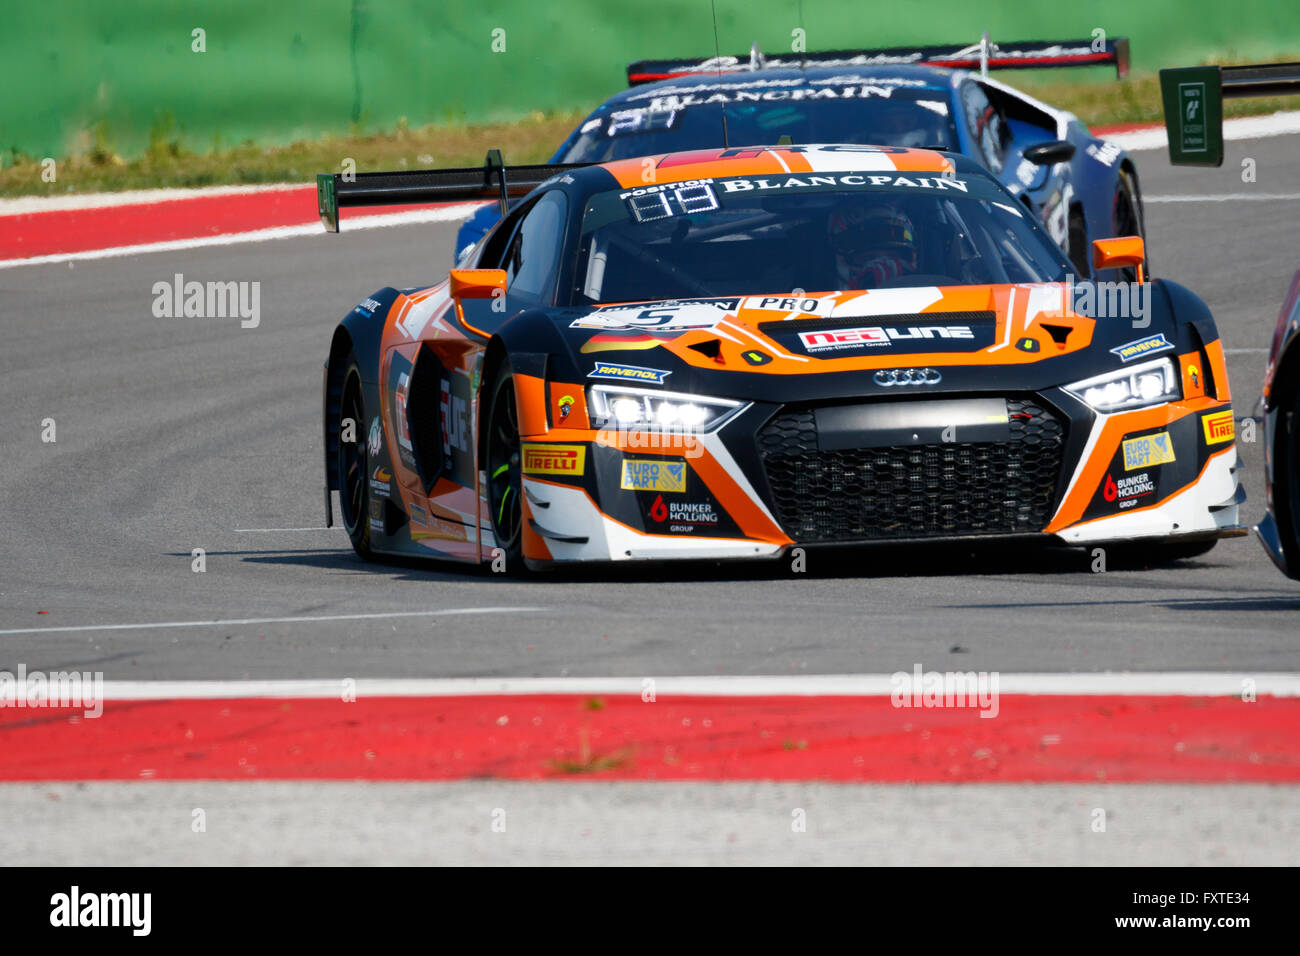 Misano Adriatico, Italy - April 10, 2016: Audi R8 LMS of Phoenix Racing Team, driven by Nicolaj Møller Madsen and Markus Pommer, the Blancpain GT Series Sprint Cup in Misano World Circuit. Stock Photo